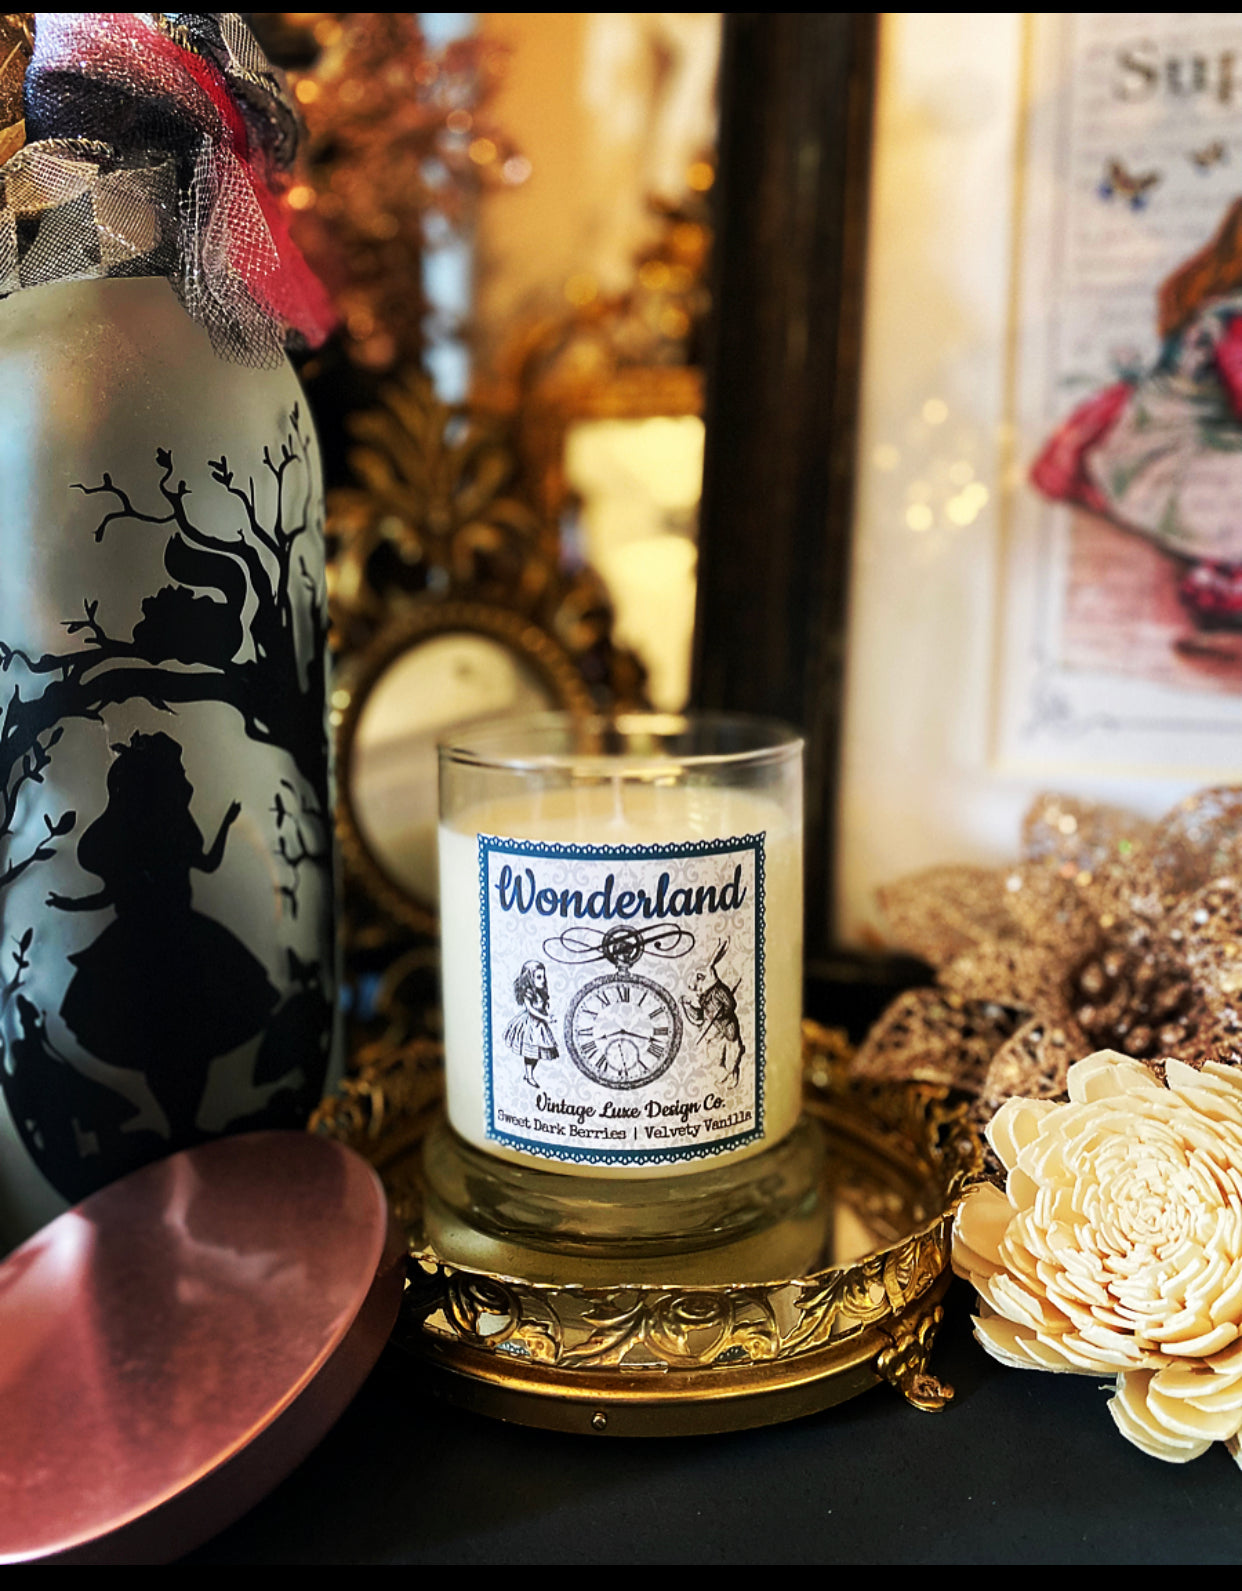 Love Spell Candle | Small Batch Soy | Mallory Candle Co